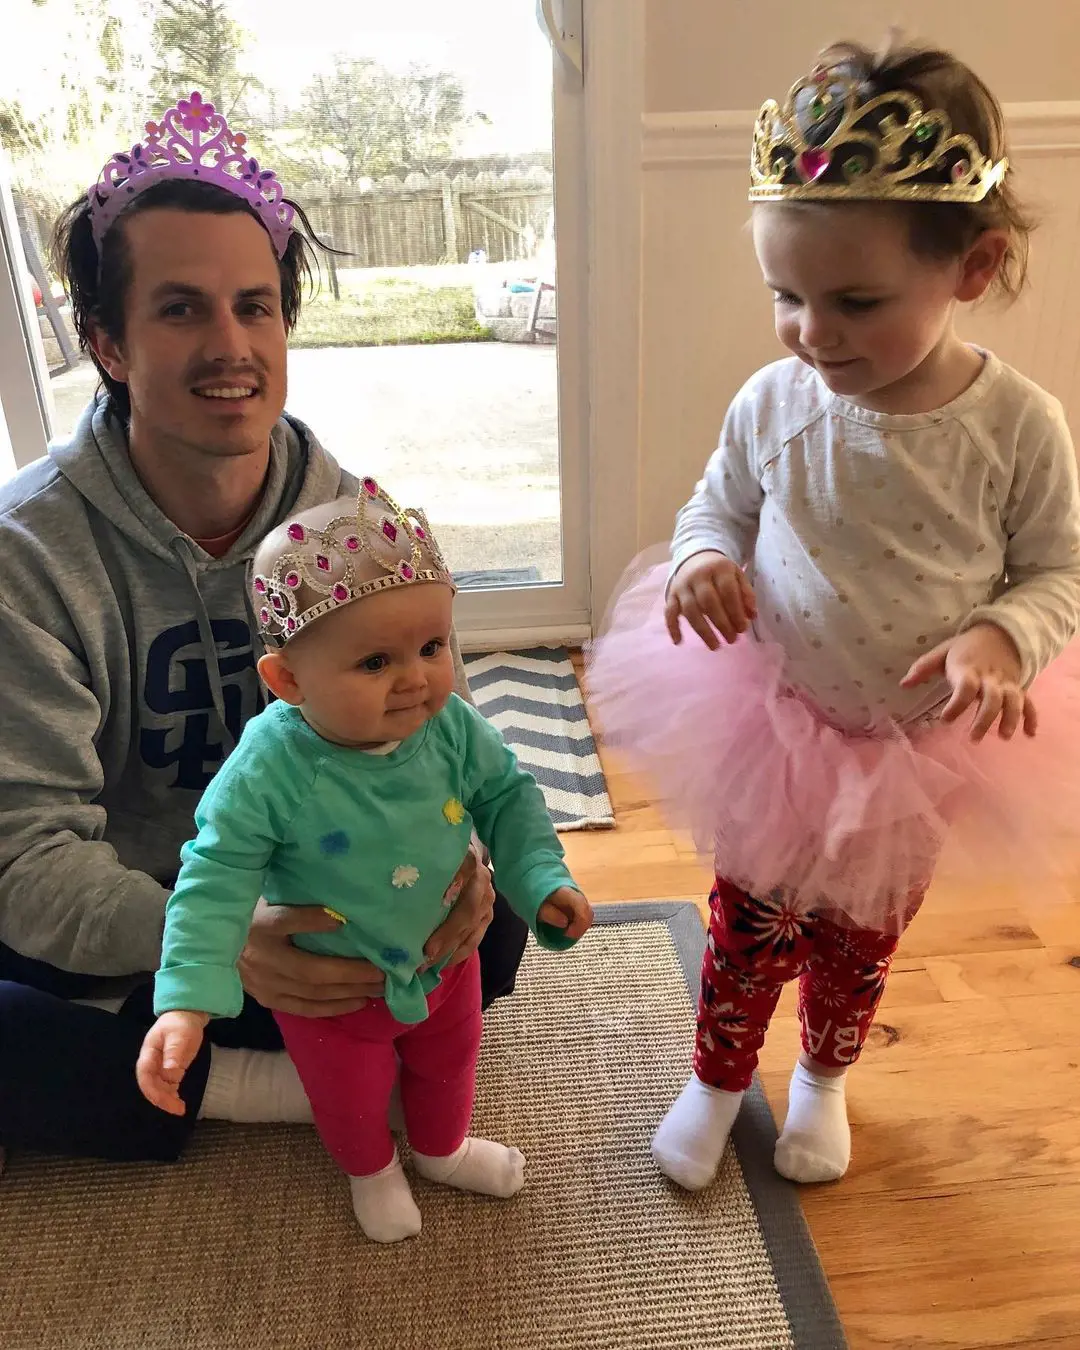 John posted a picture with his two beautiful daughters